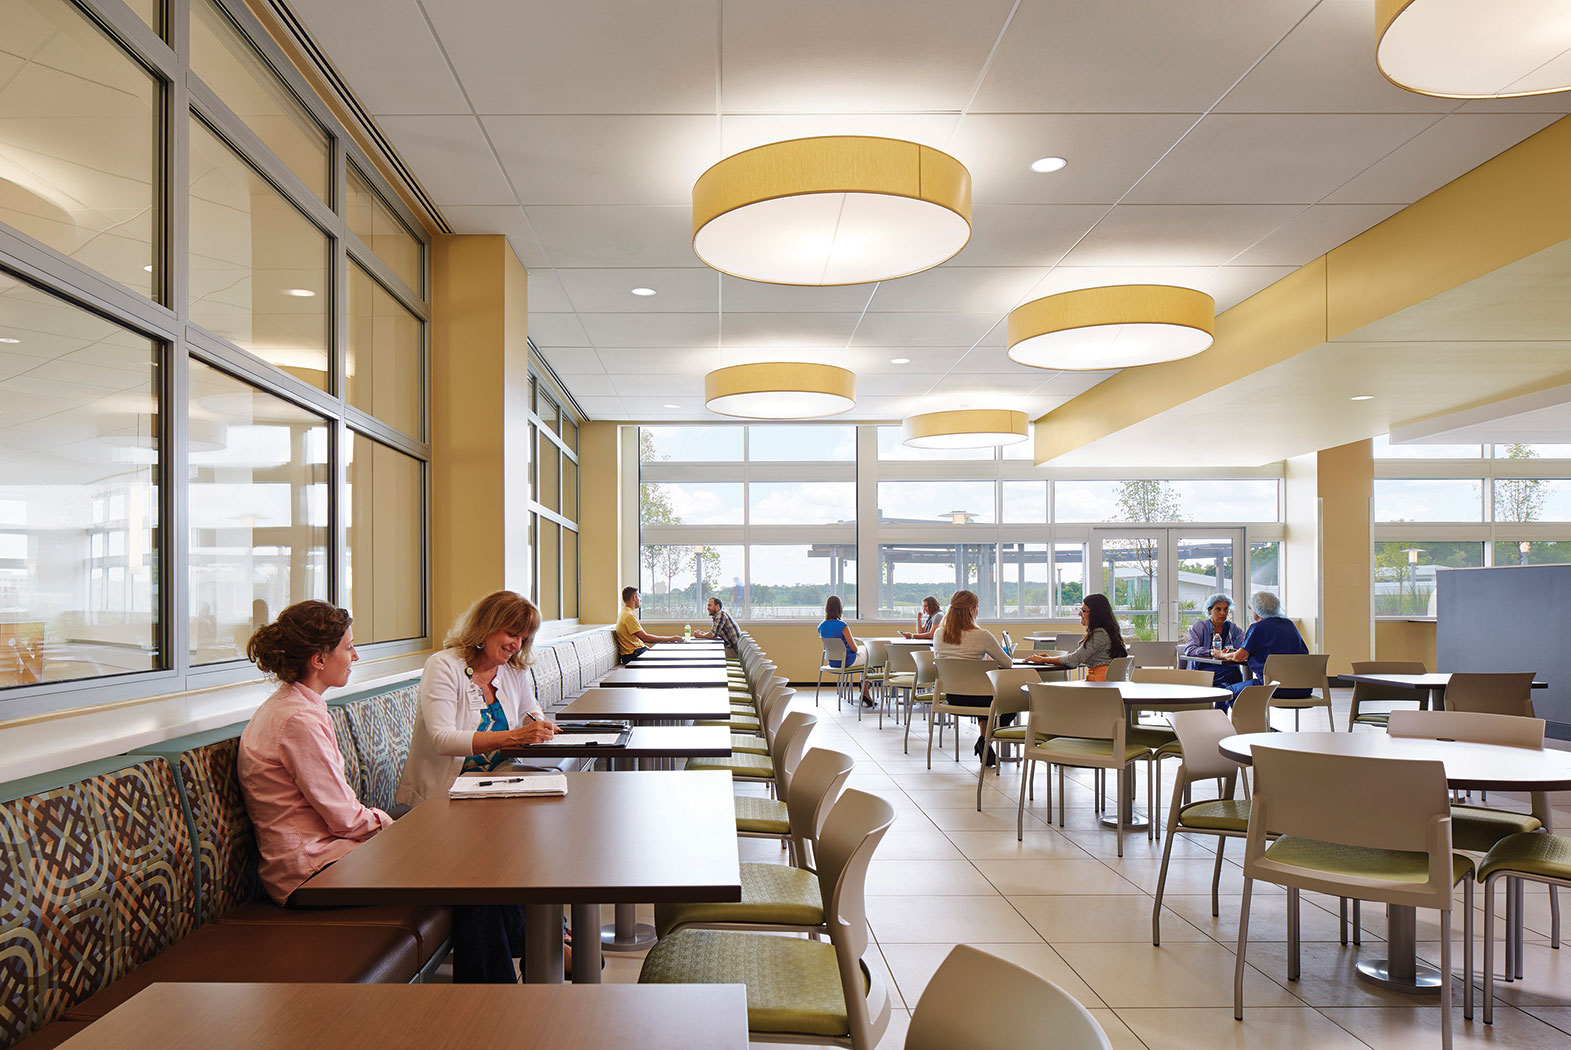 Hospitals take a fresh look on cafeteria design | Health Facilities